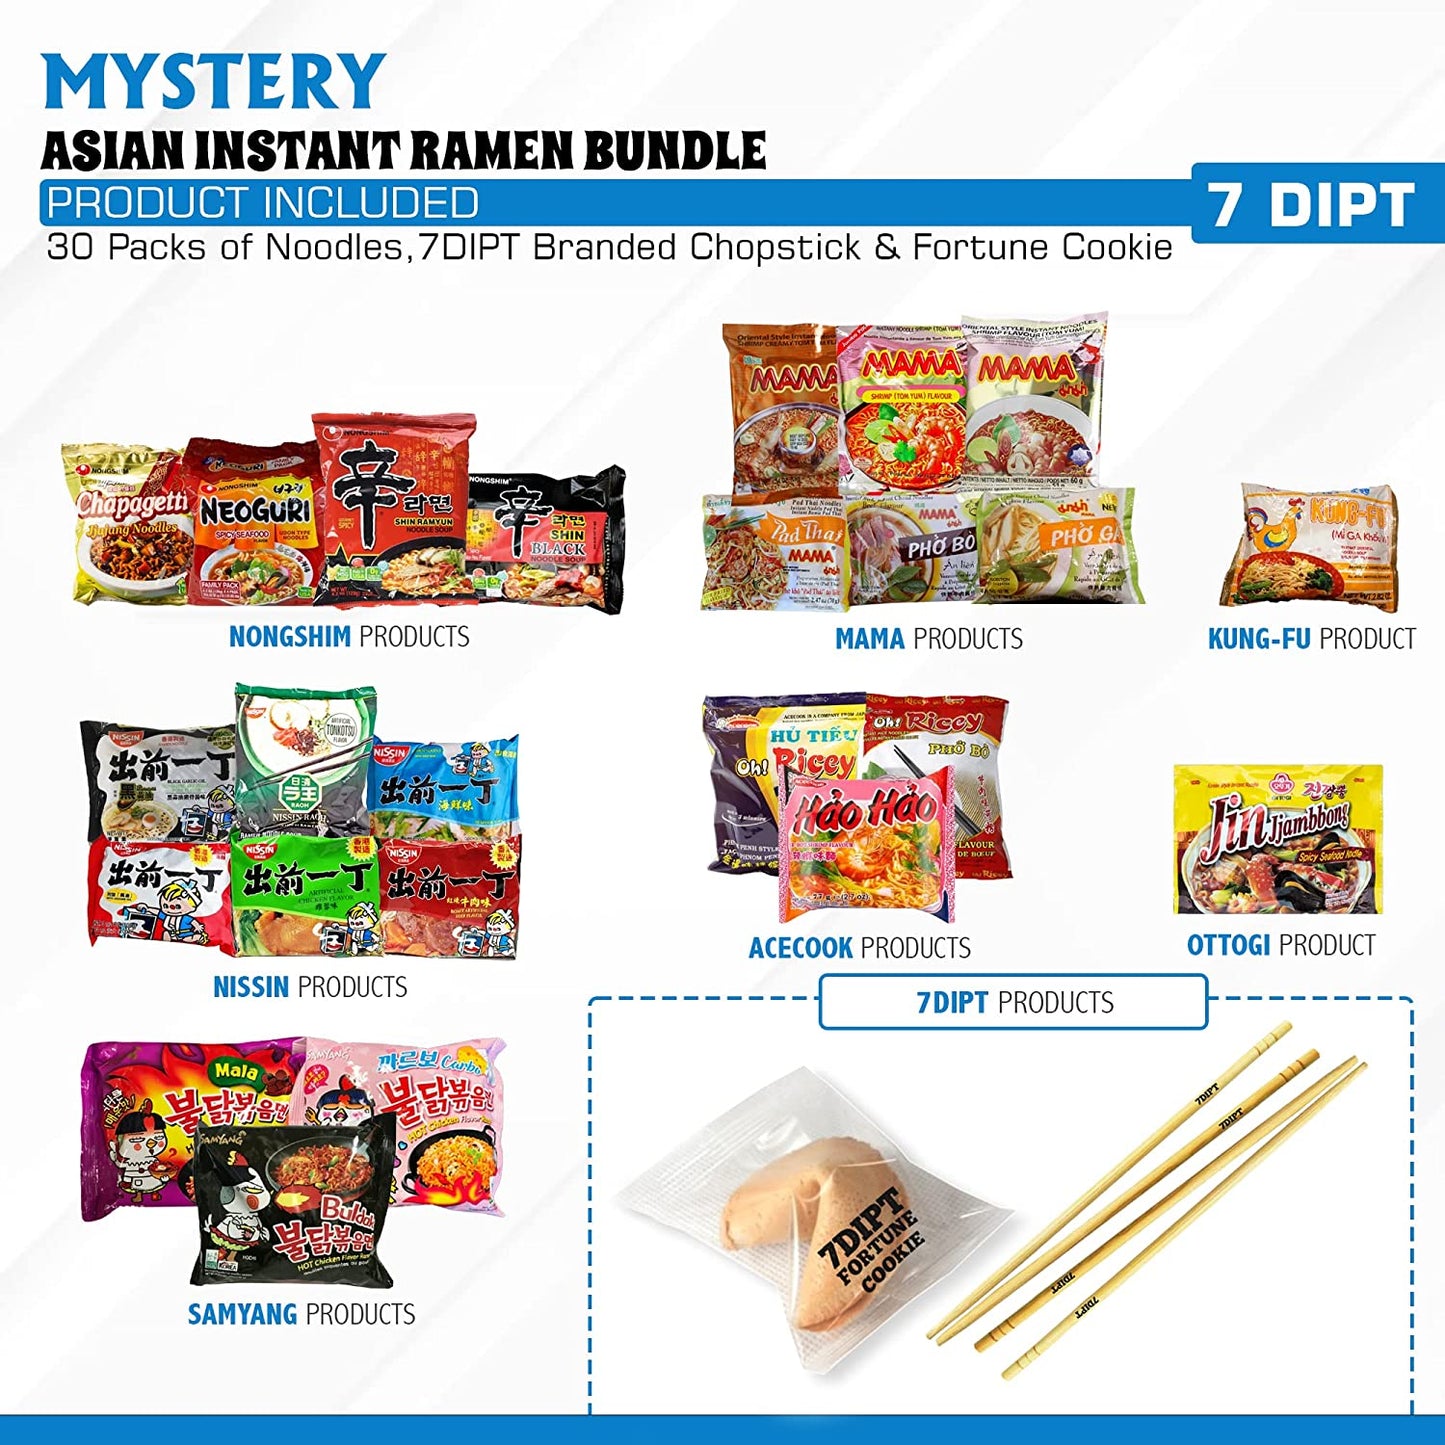 Asian Instant Ramen Variety Pack: 30 Assorted Noodles with Fortune Cookie & Chopsticks Bonus!